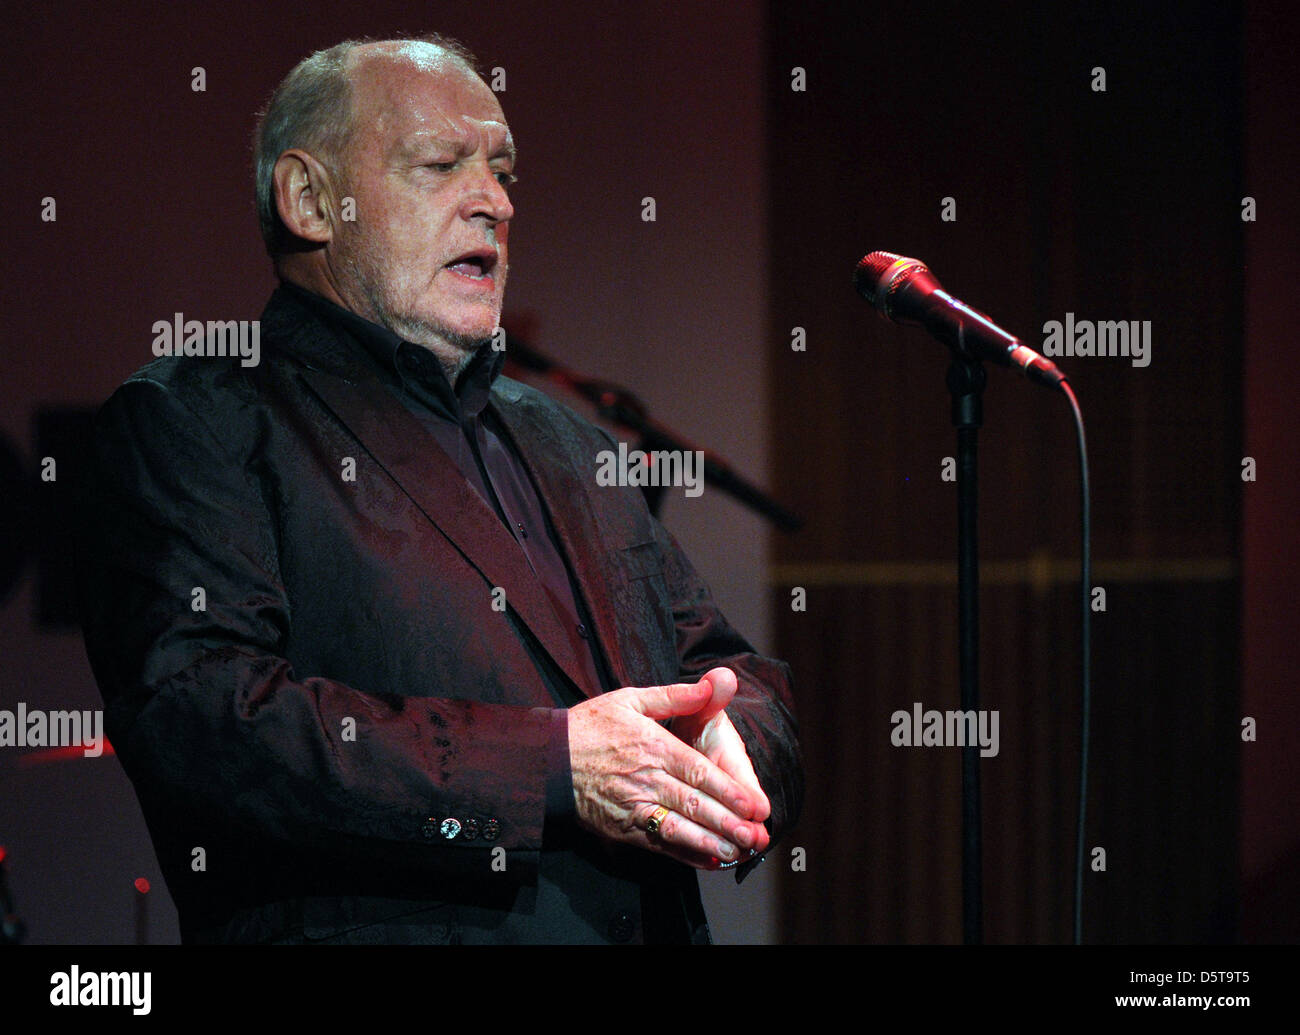 British singer Joe Cocker performs during a concert for the German public broadcaster WDR2 in Cologne, Germany, 18 November 2012. Photo: Henning Kaiser Stock Photo